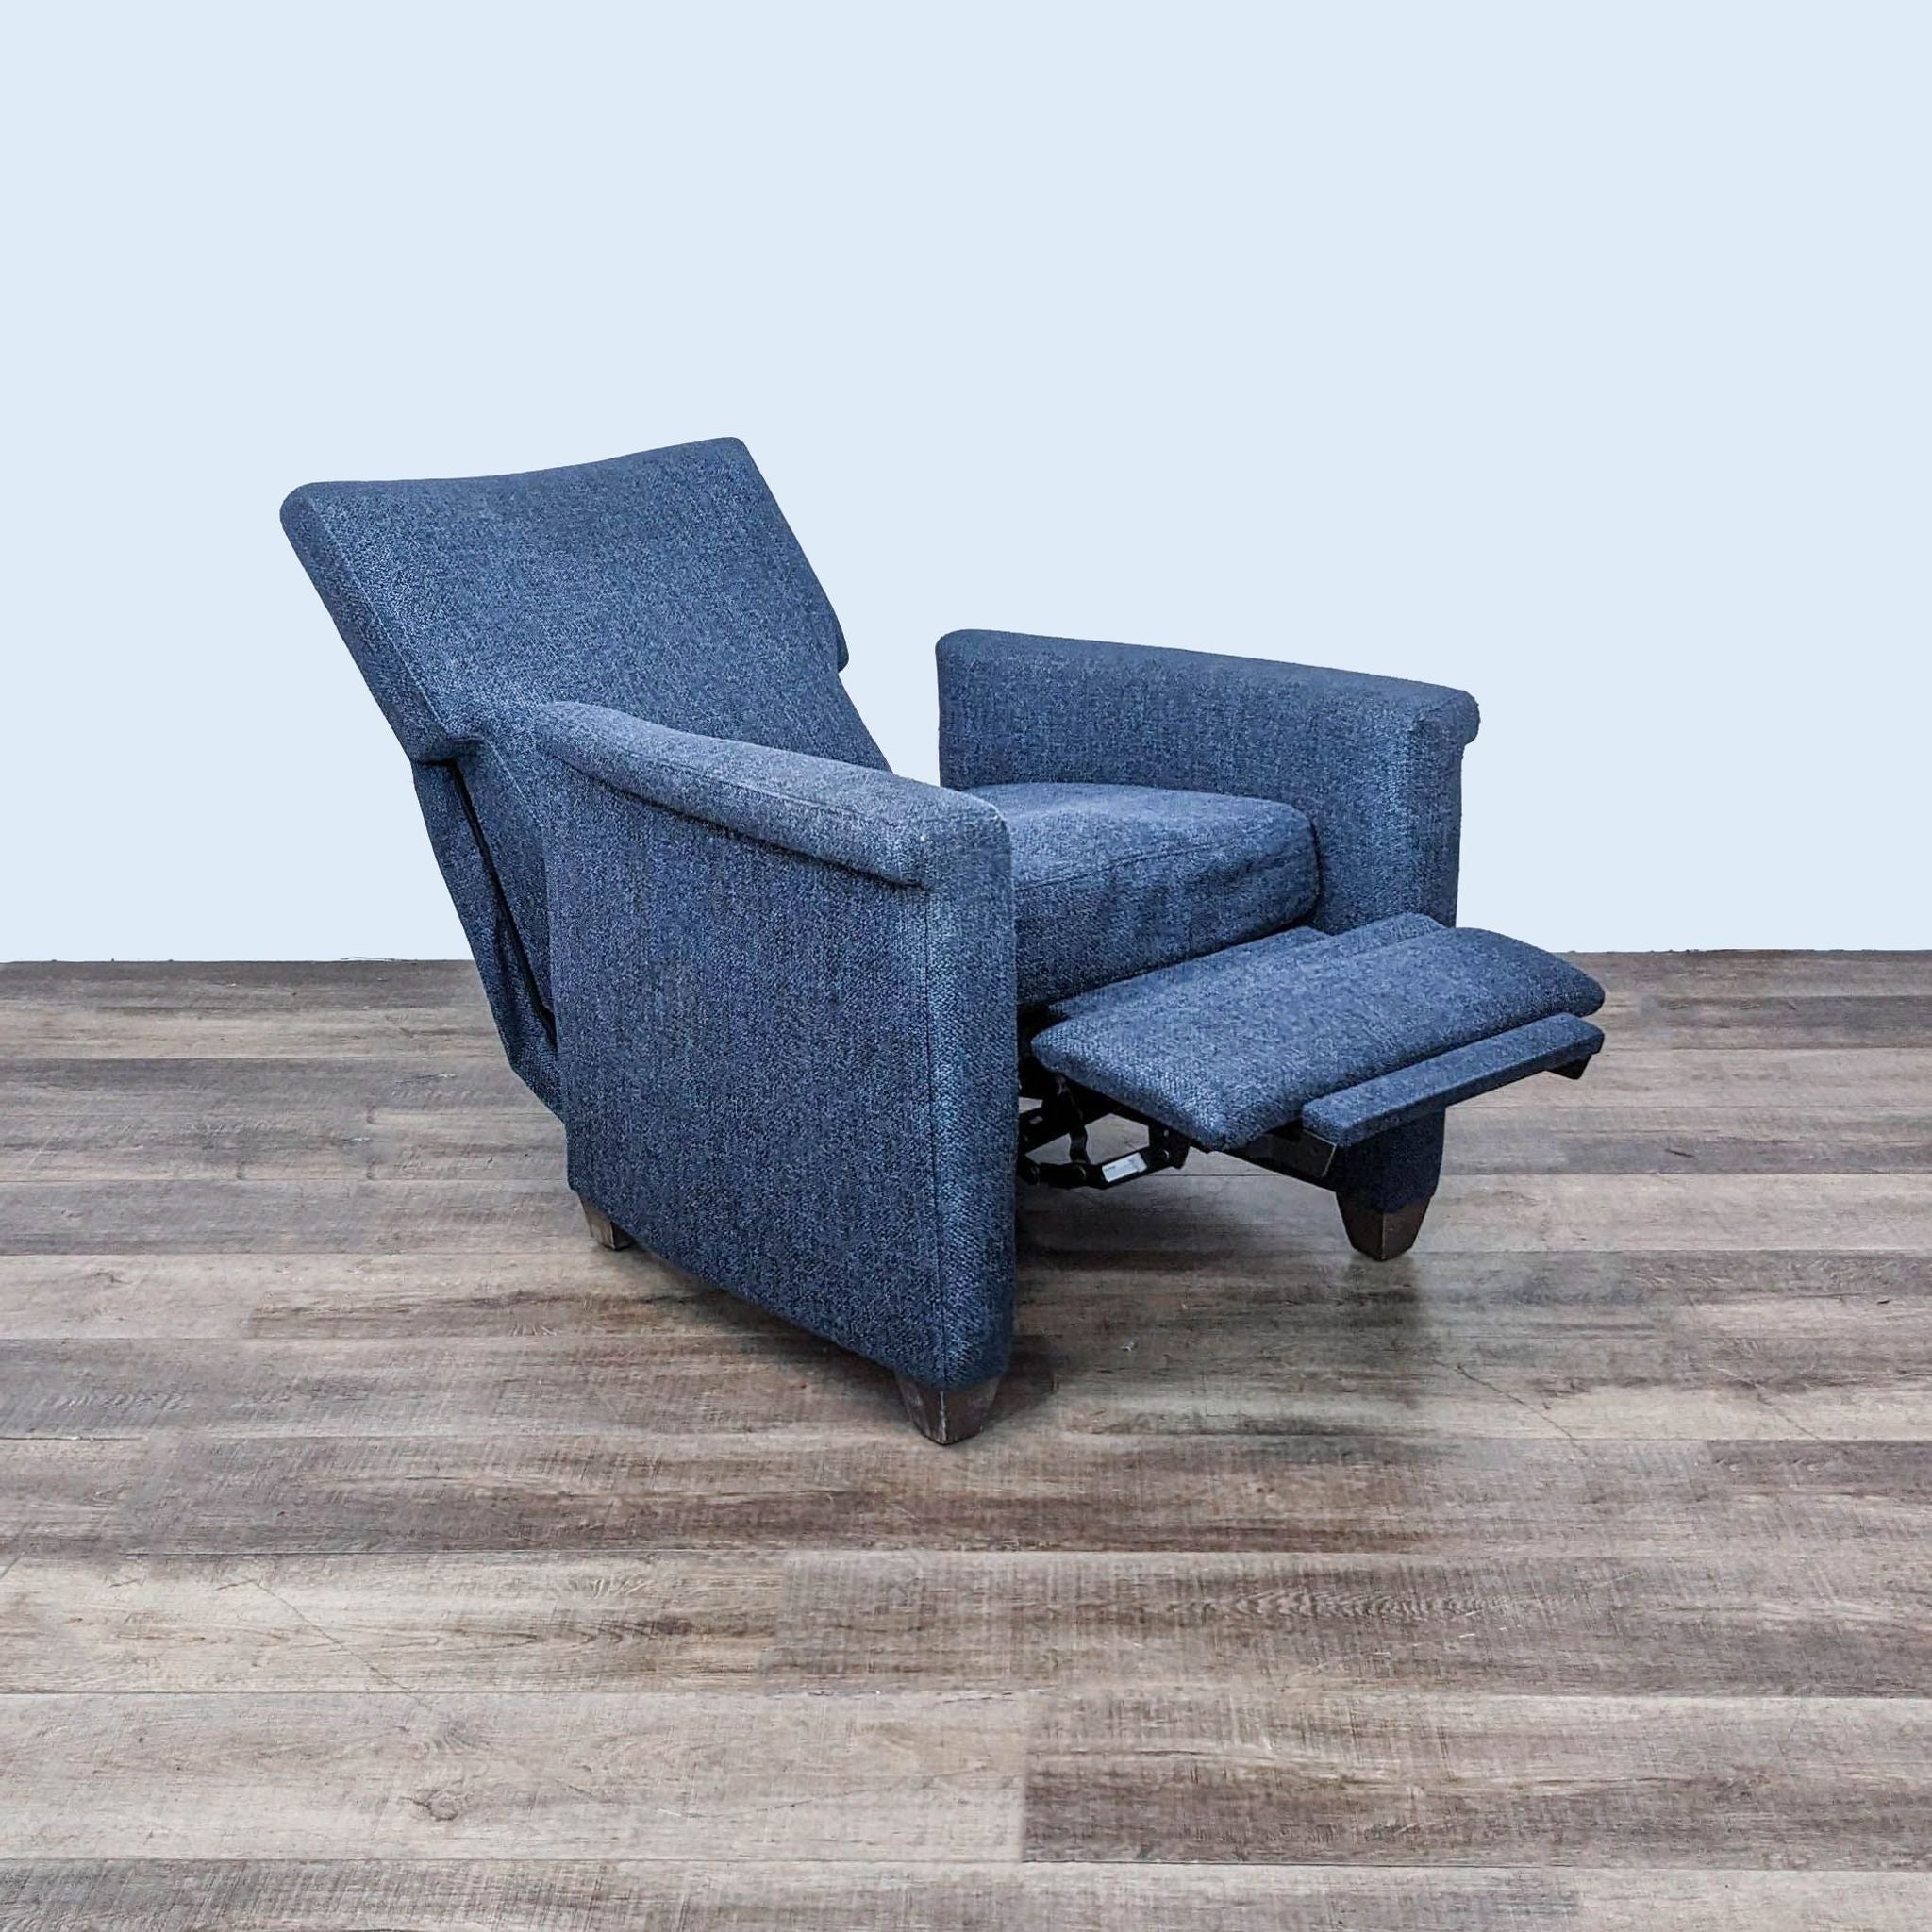 Crate & Barrel Declan lounge chair reclined on wooden floor, showcasing its manual recline function and supportive armrests.